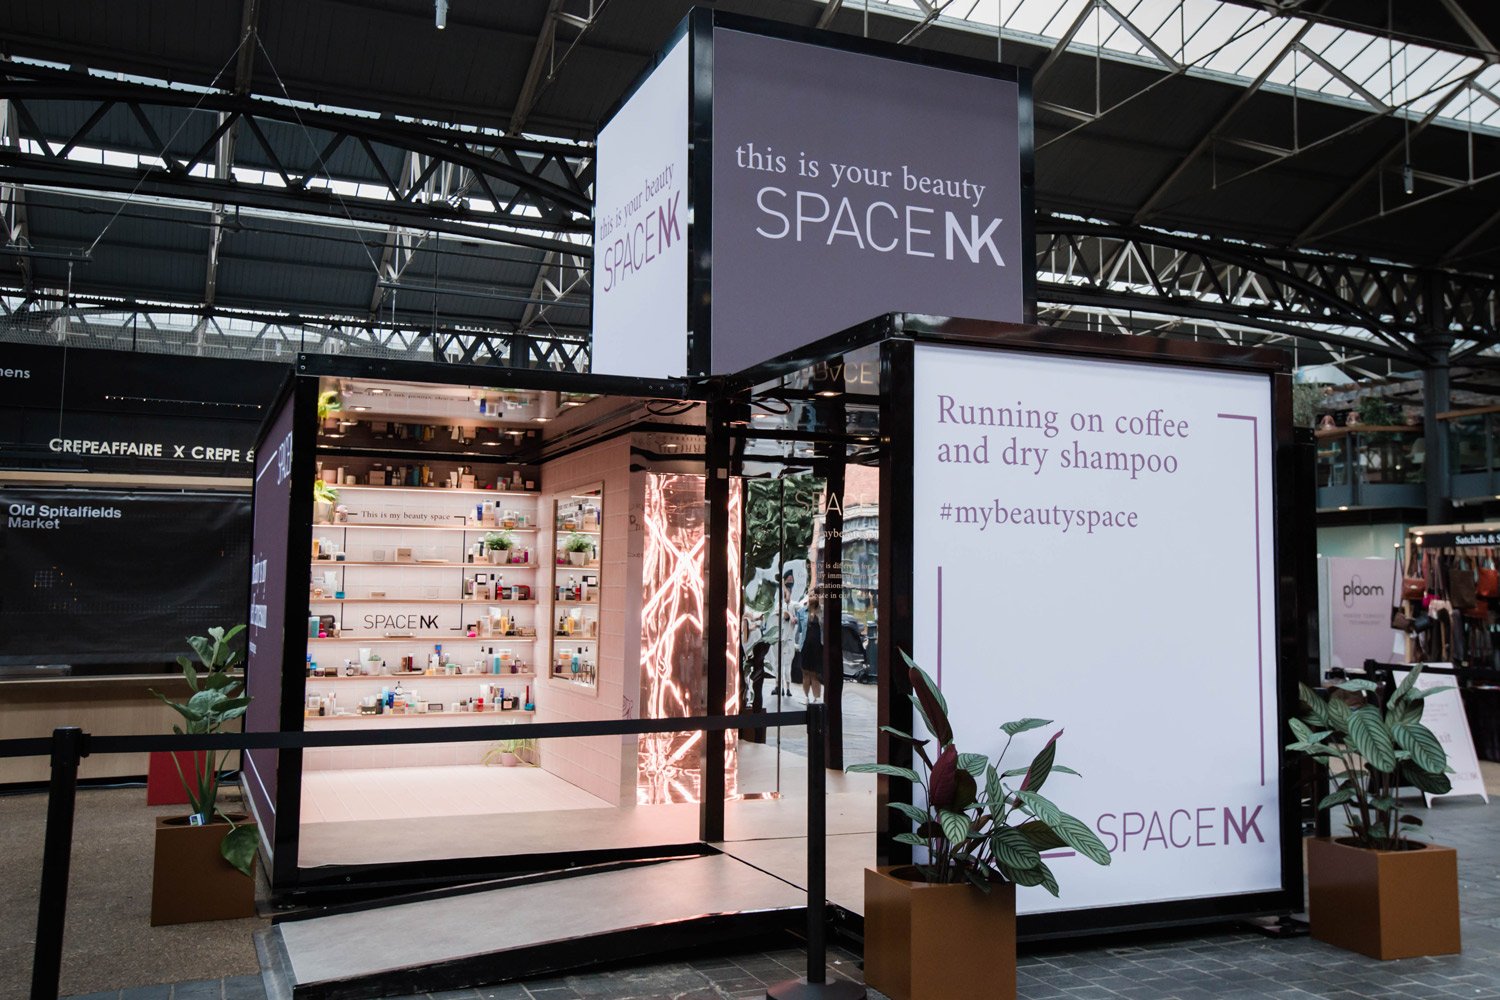 SpaceNK - Your Beauty Space - Experiential Agency